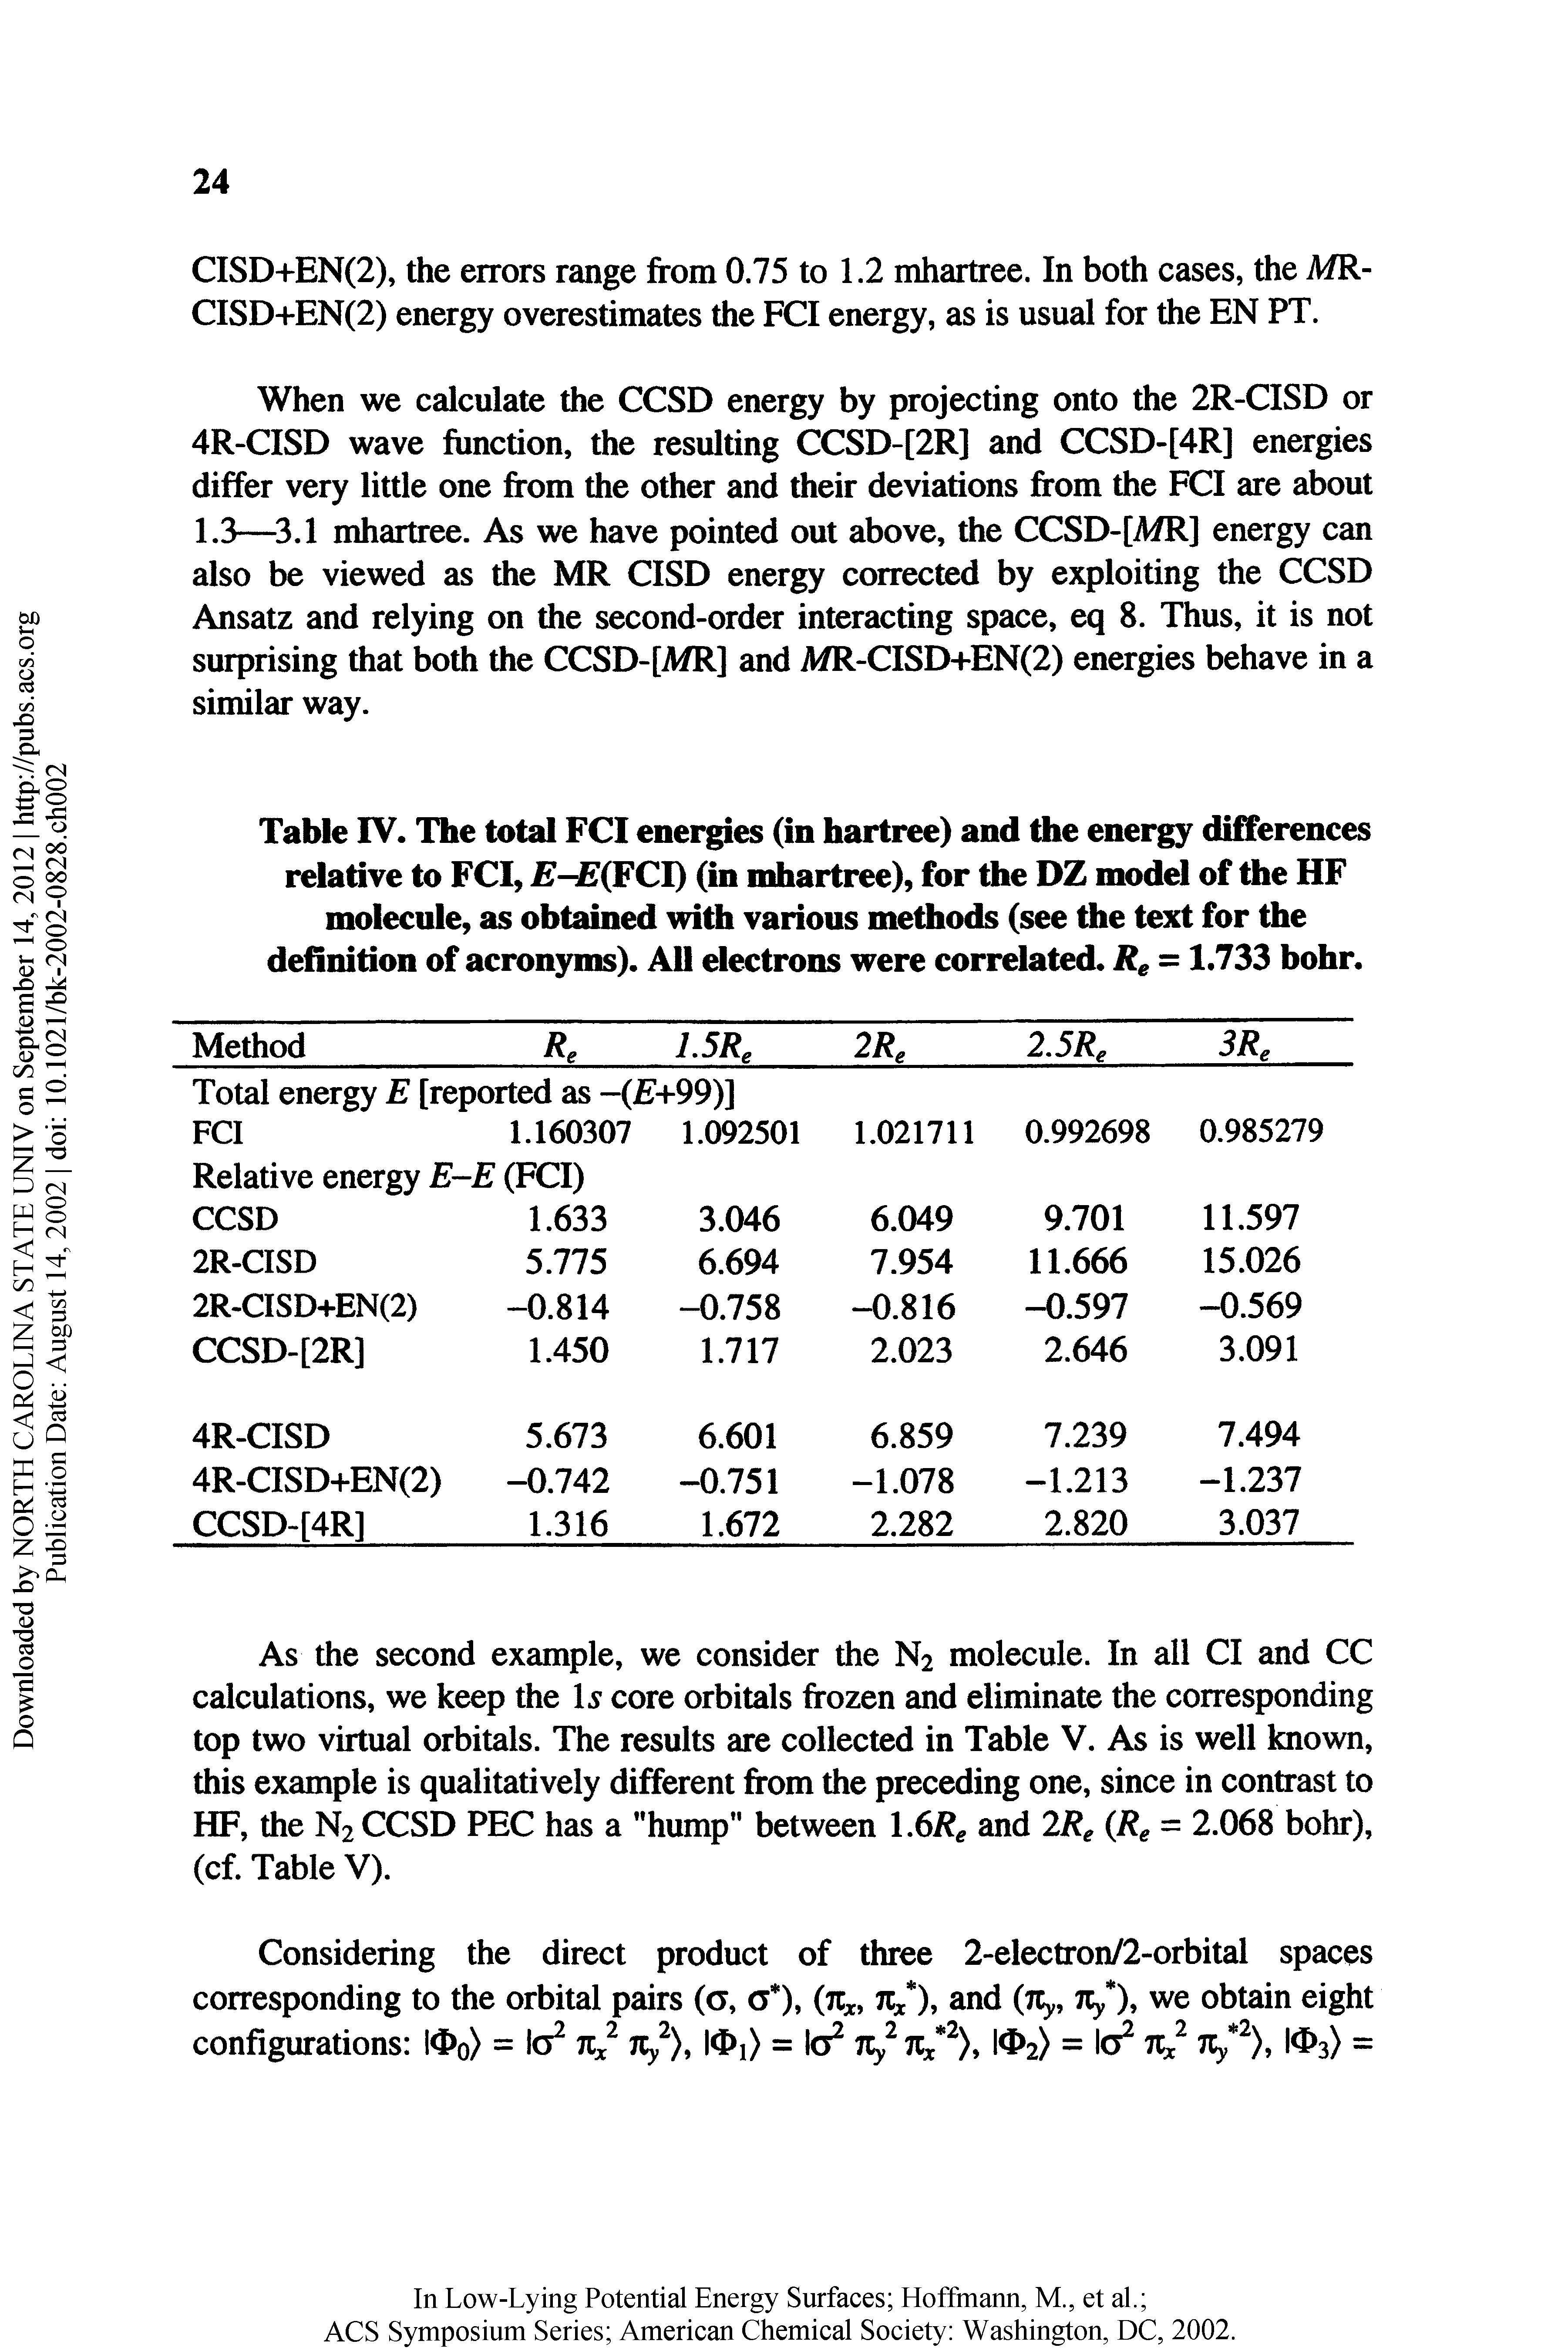 Table IV. The total FCI energies (in hartree) and the energy differences relative to FCI, E-E(FCT) (in mhartree), for the DZ model of the HF molecule, as obtained with various mediods (i die text for the definition of acron3m(is). All electrons were correlated. Rg = 1.733 bohr.